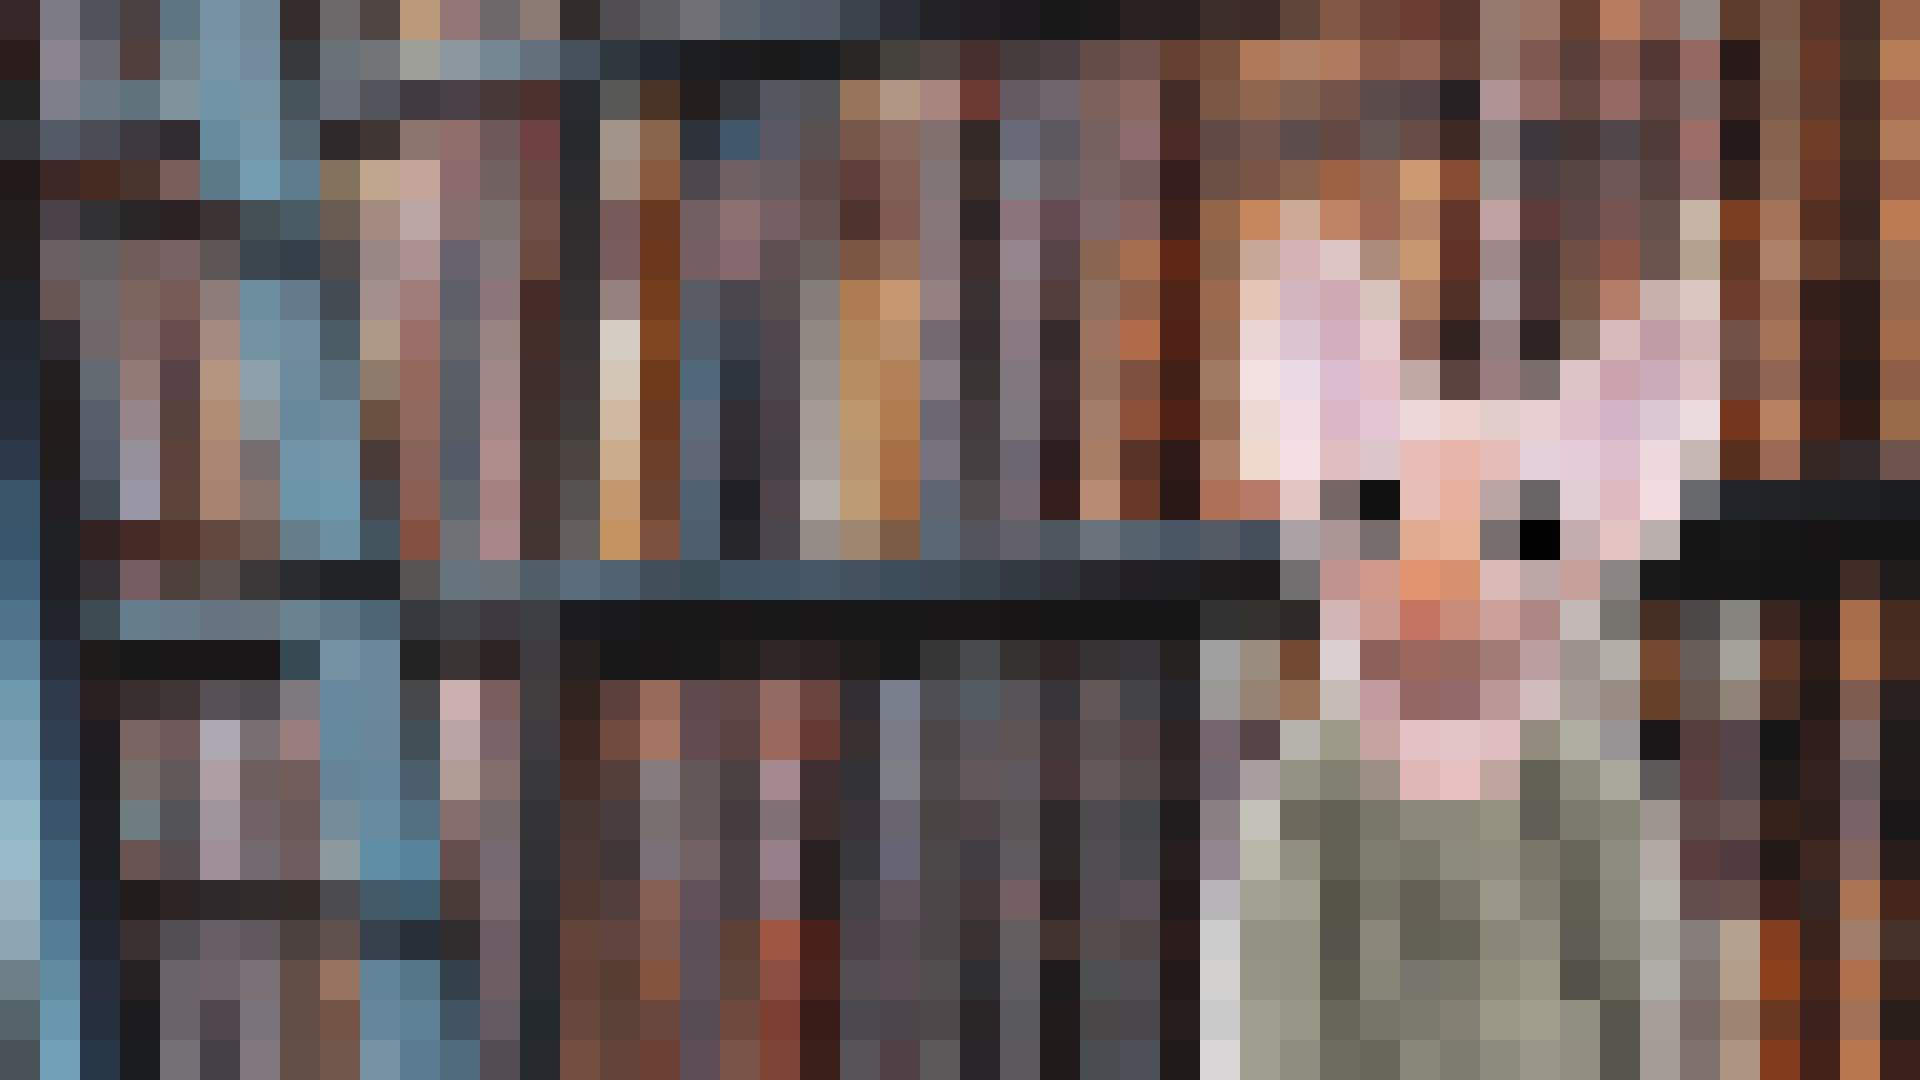 A pixelated Harry Potter character 